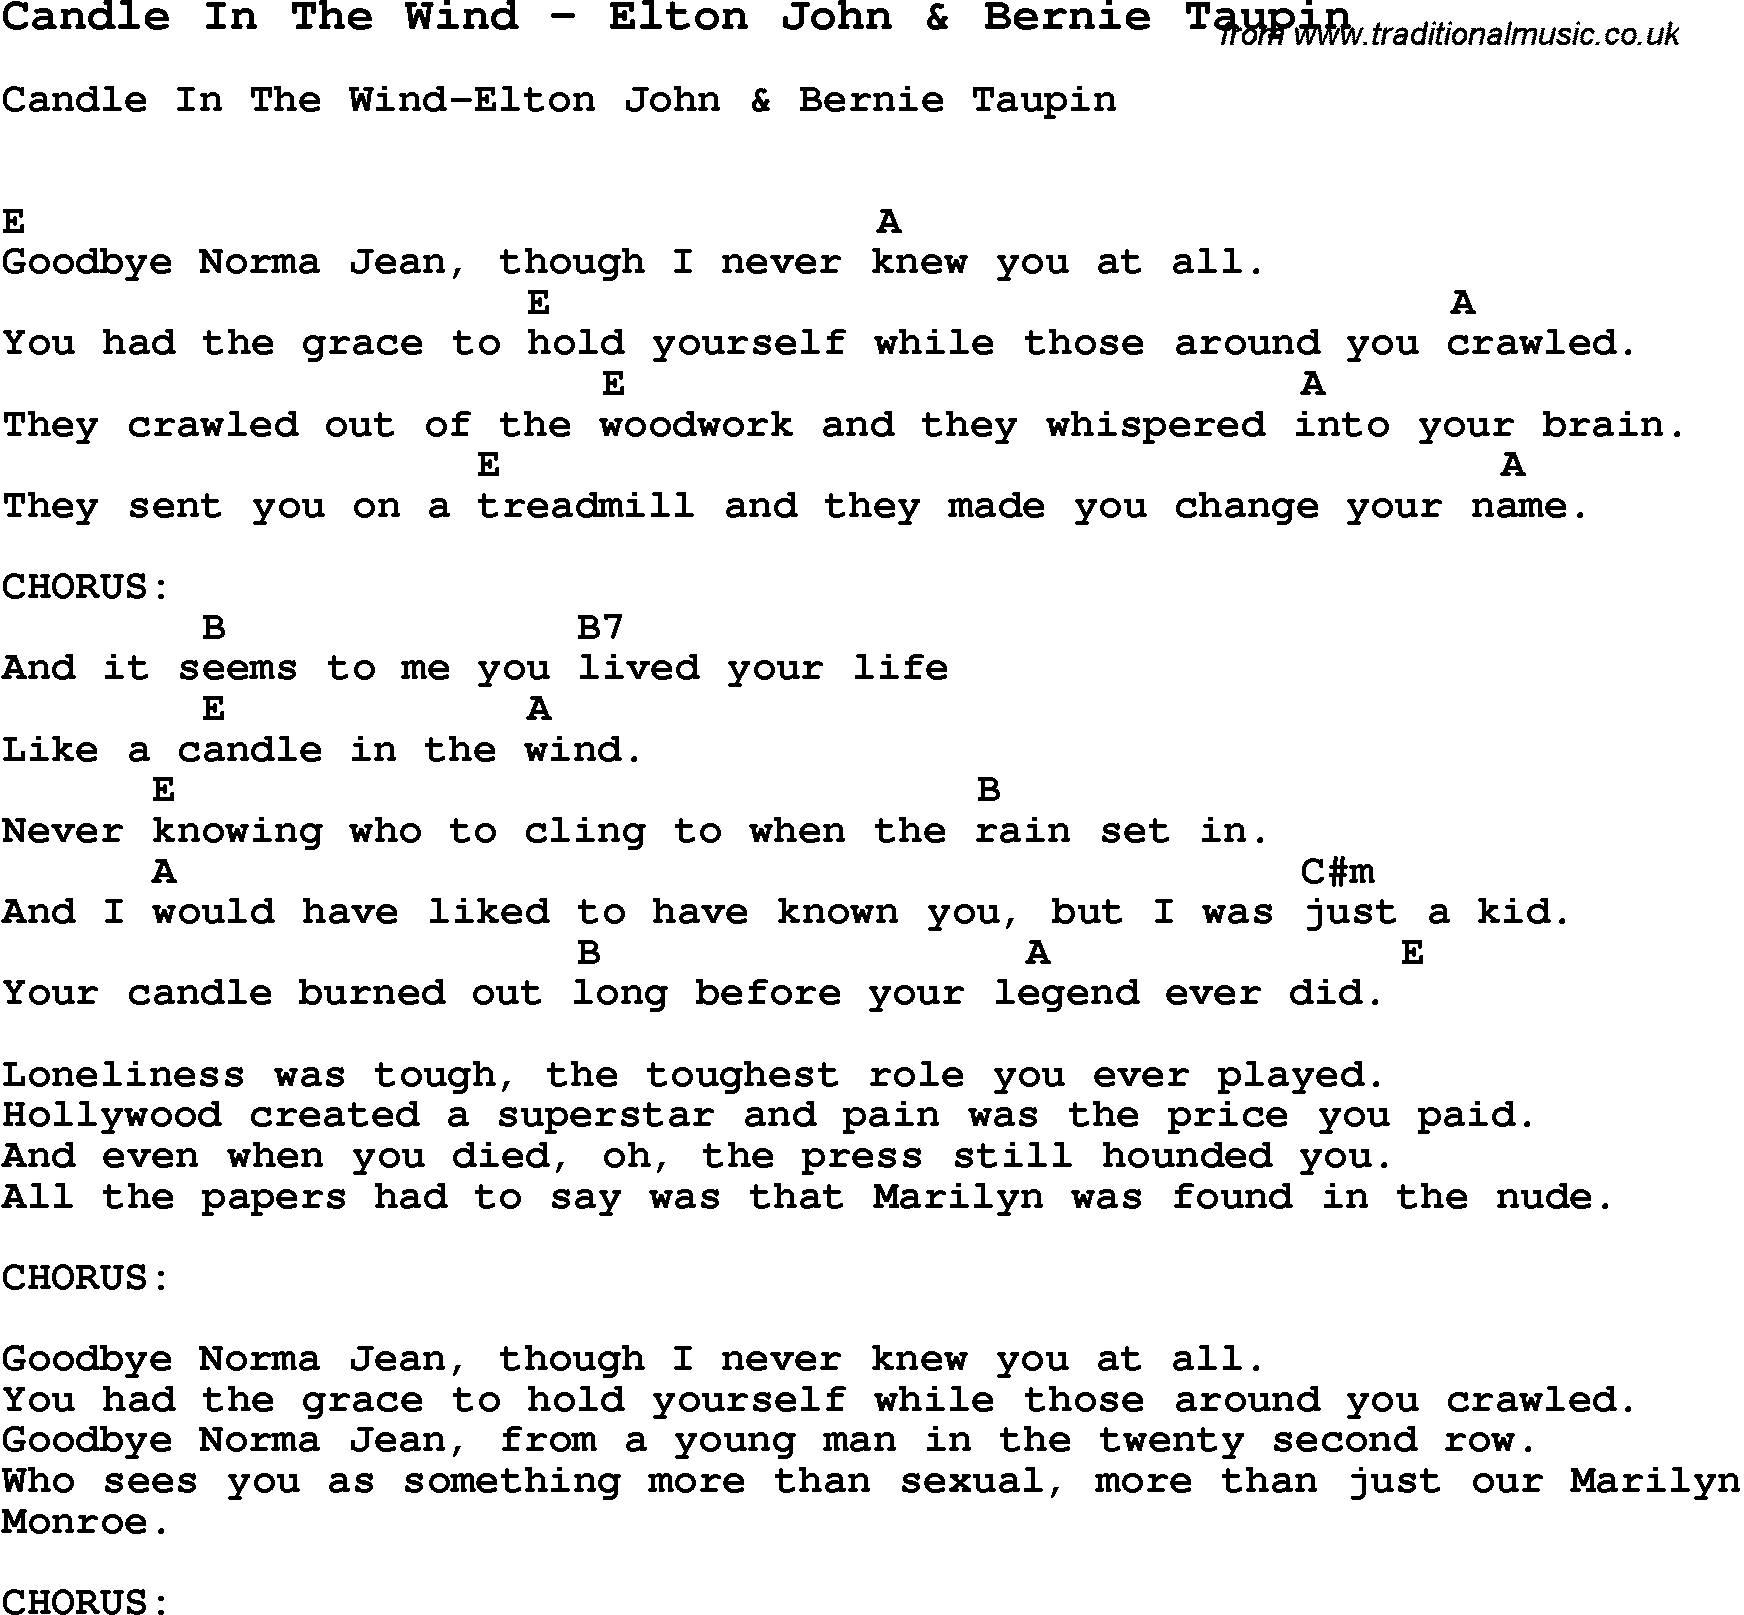 Song Candle In The Wind by Elton John & Bernie Taupin, with lyrics for vocal performance and accompaniment chords for Ukulele, Guitar Banjo etc.